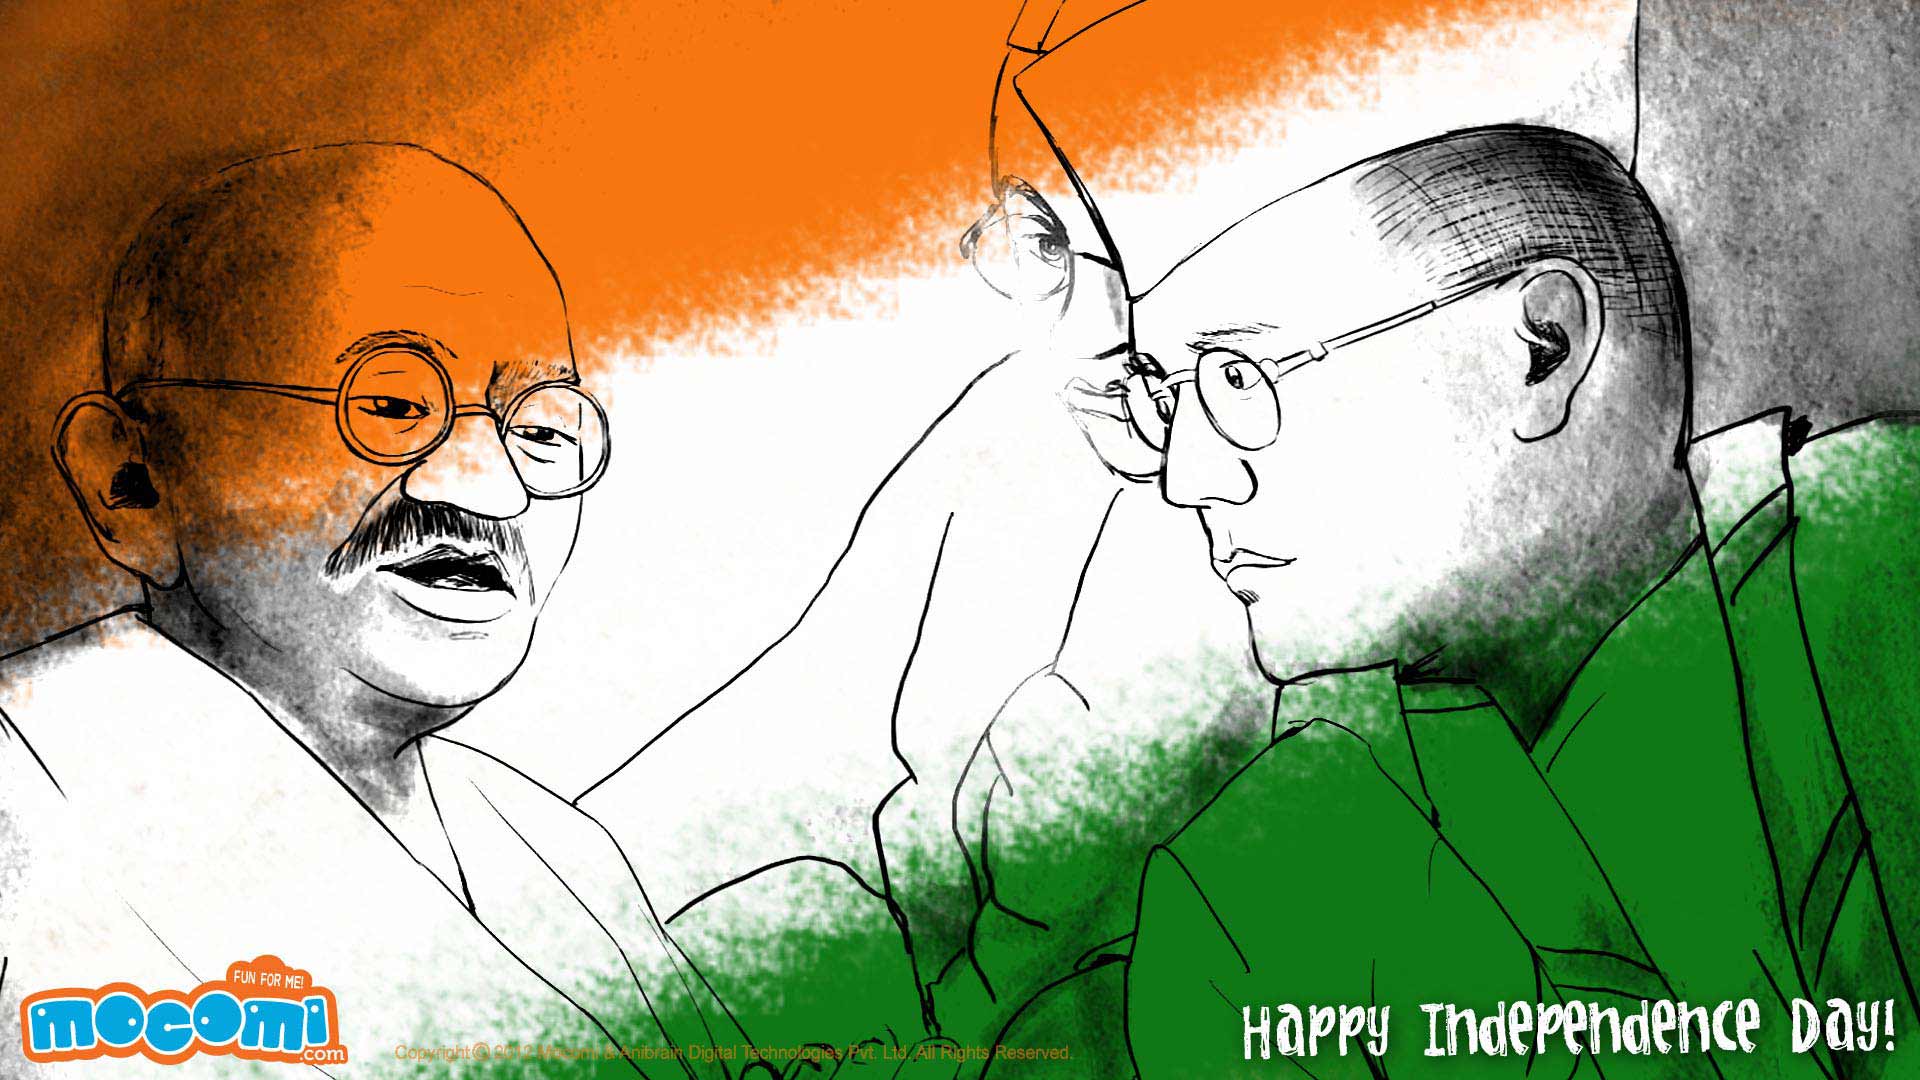 Independence Day – Freedom Fighters